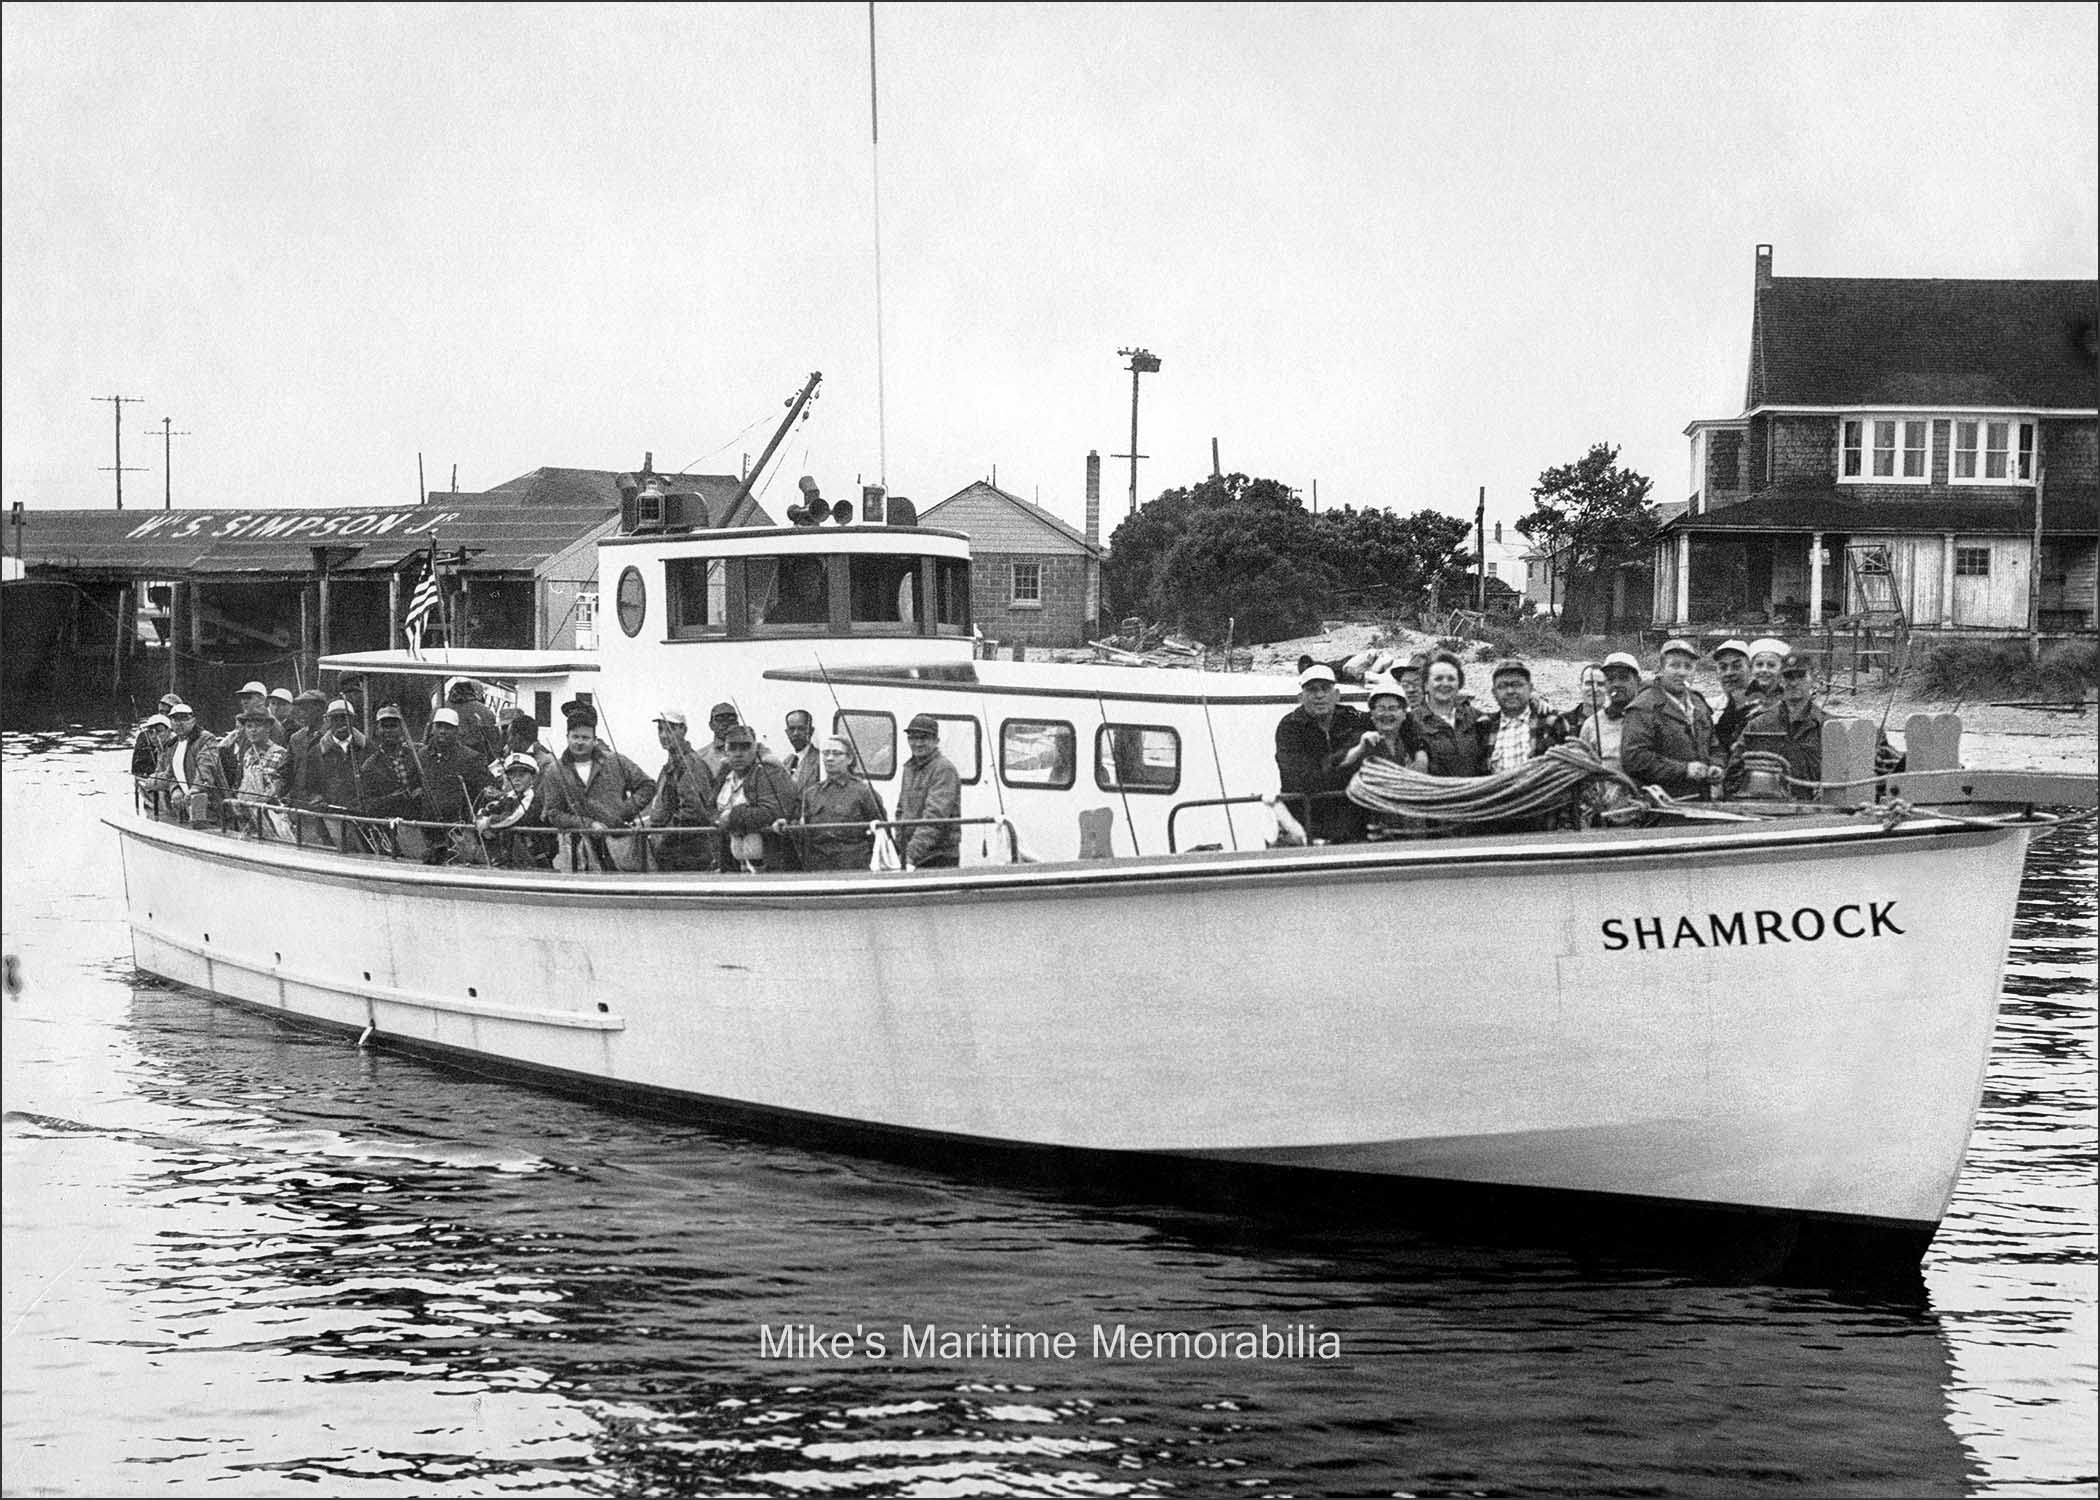 SHAMROCK, Point Pleasant Beach, NJ – 1955 Captain 'Jack' Bogan's "SHAMROCK" from Point Pleasant, NJ circa 1955. She was built in 1953 by the Van Sant Boat Yard at Atlantic City, NJ and she was the first party boat ever built with a flush deck, that is, her cabins and heads were located on the main deck. In 1971, Captain 'Jack' sold the boat to his mate, Bob Pennington and she became his first "SEA DEVIL". The photo is courtesy of Captain 'Jack' Bogan Sr.